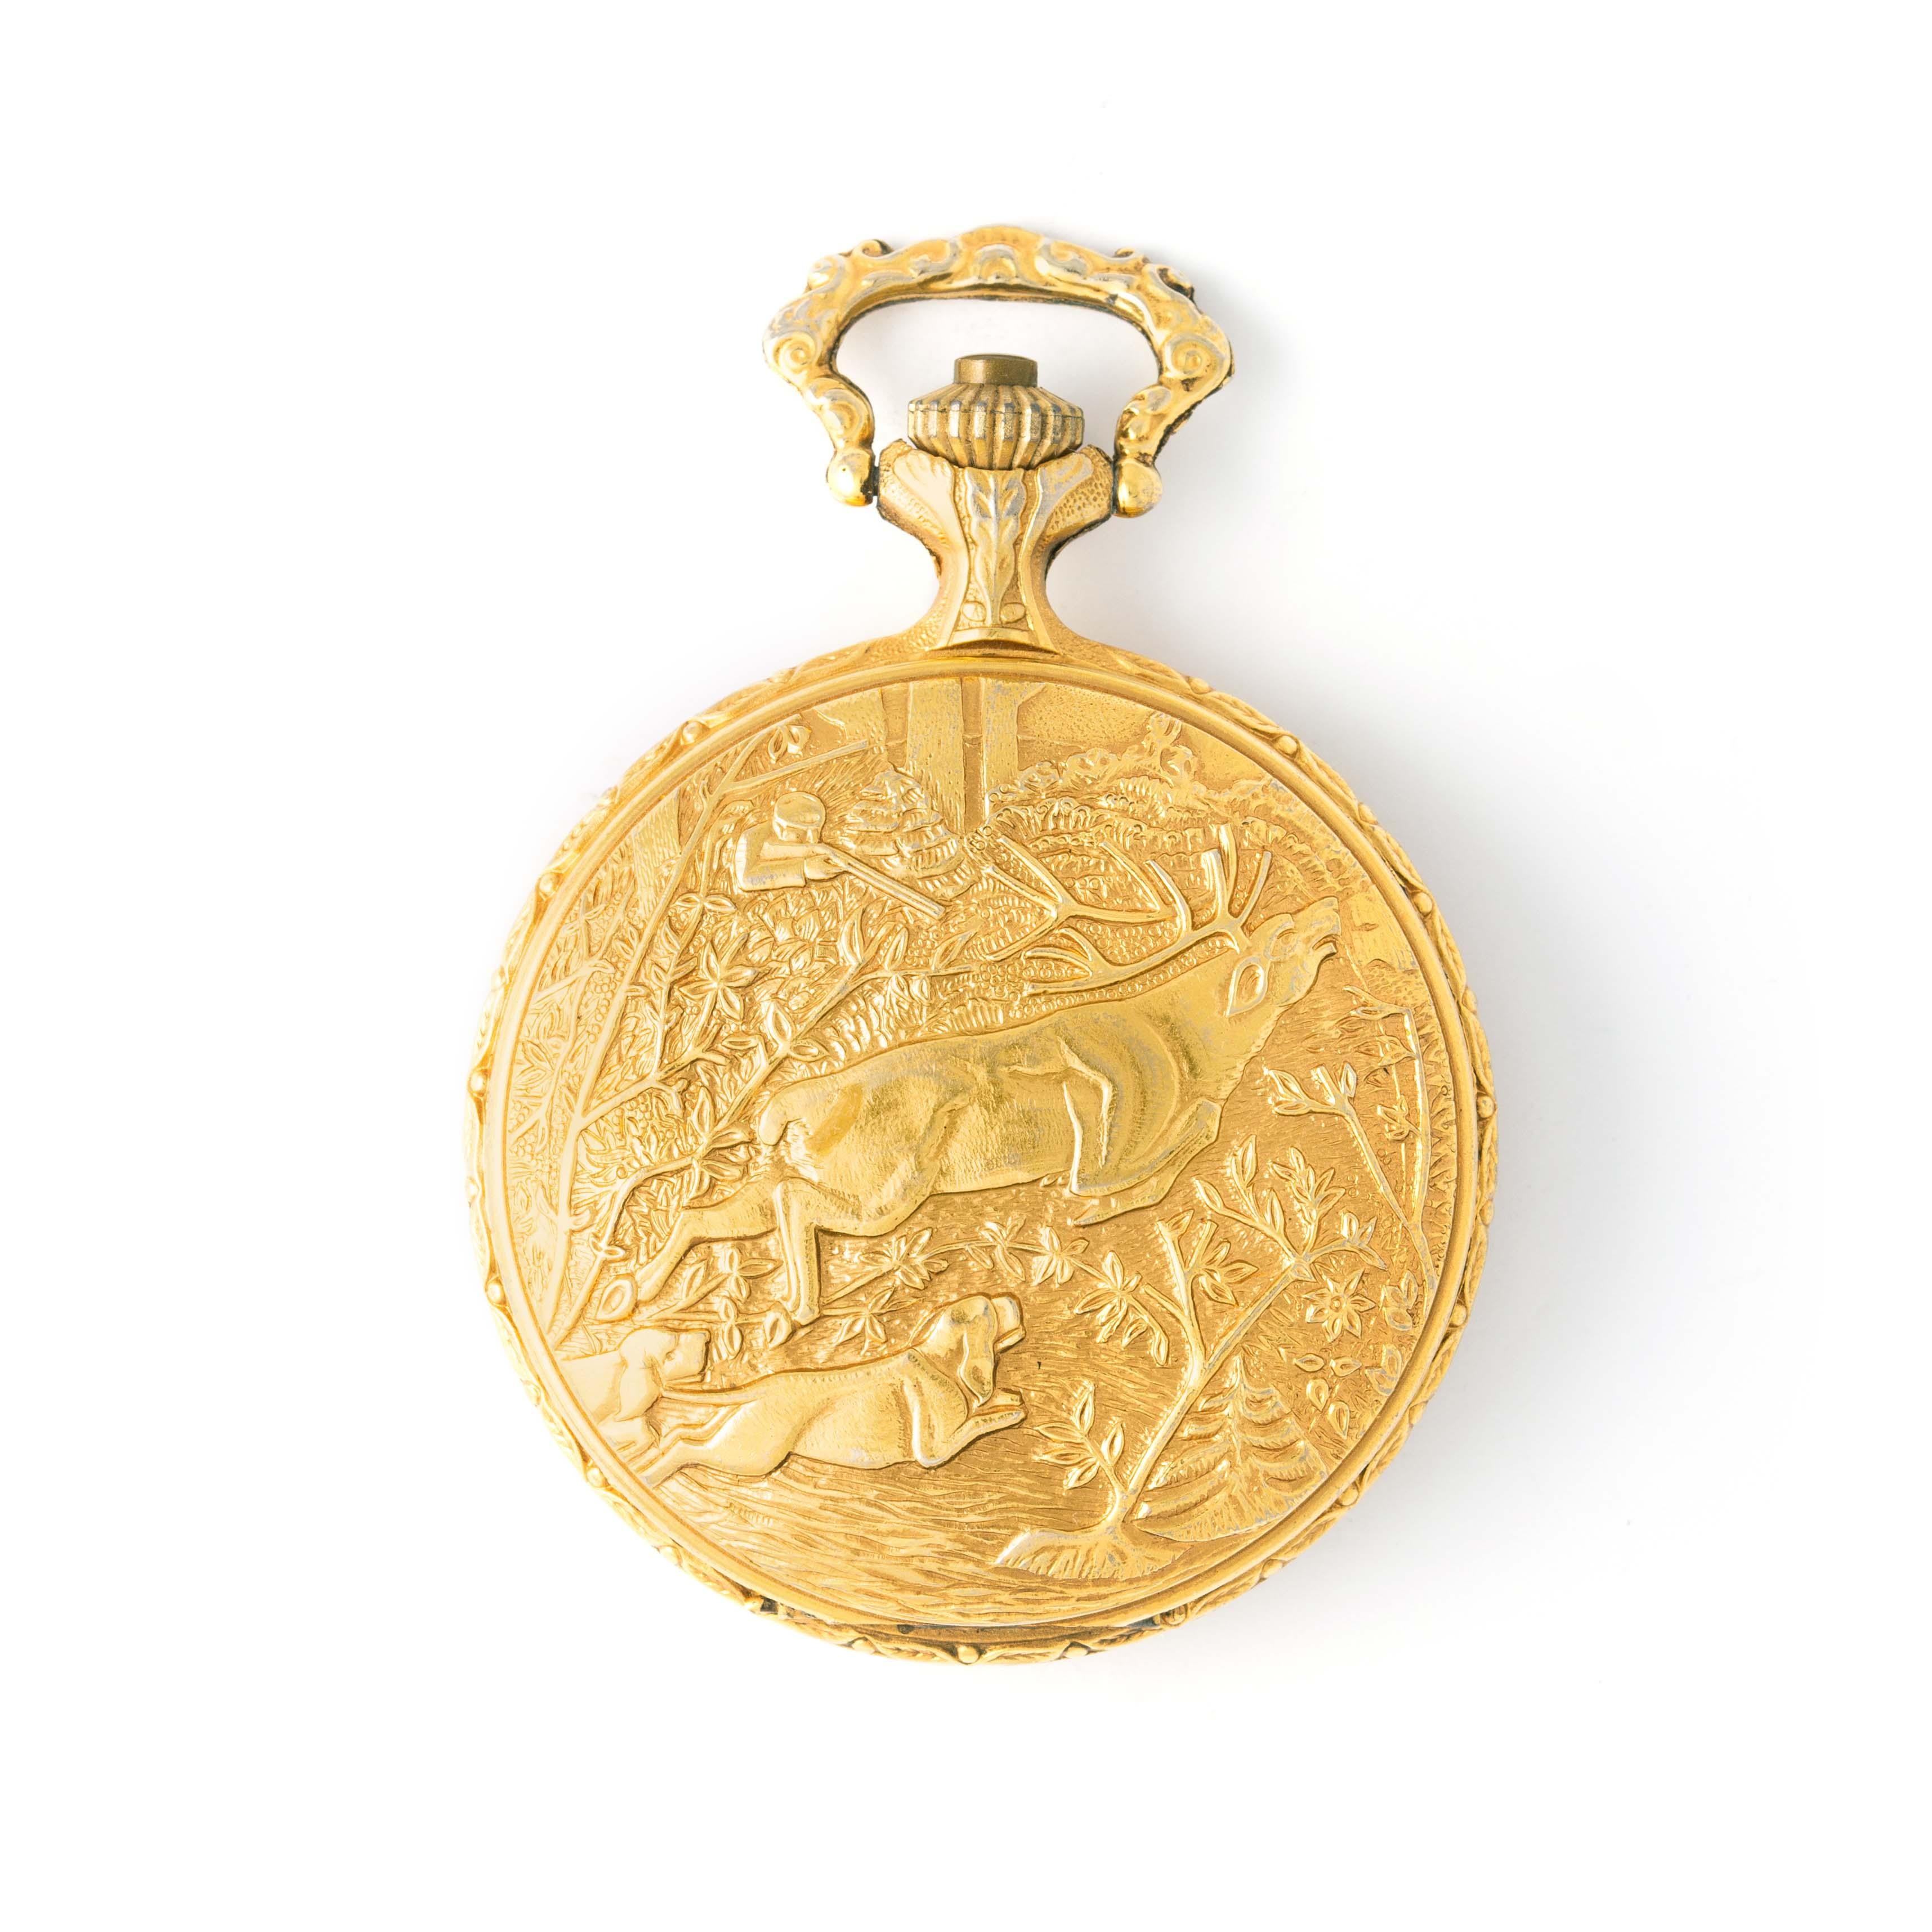 Pocket watch in gilded metal.
Height: 6.80 centimeters.

We do not guarantee the functioning of this watch.

